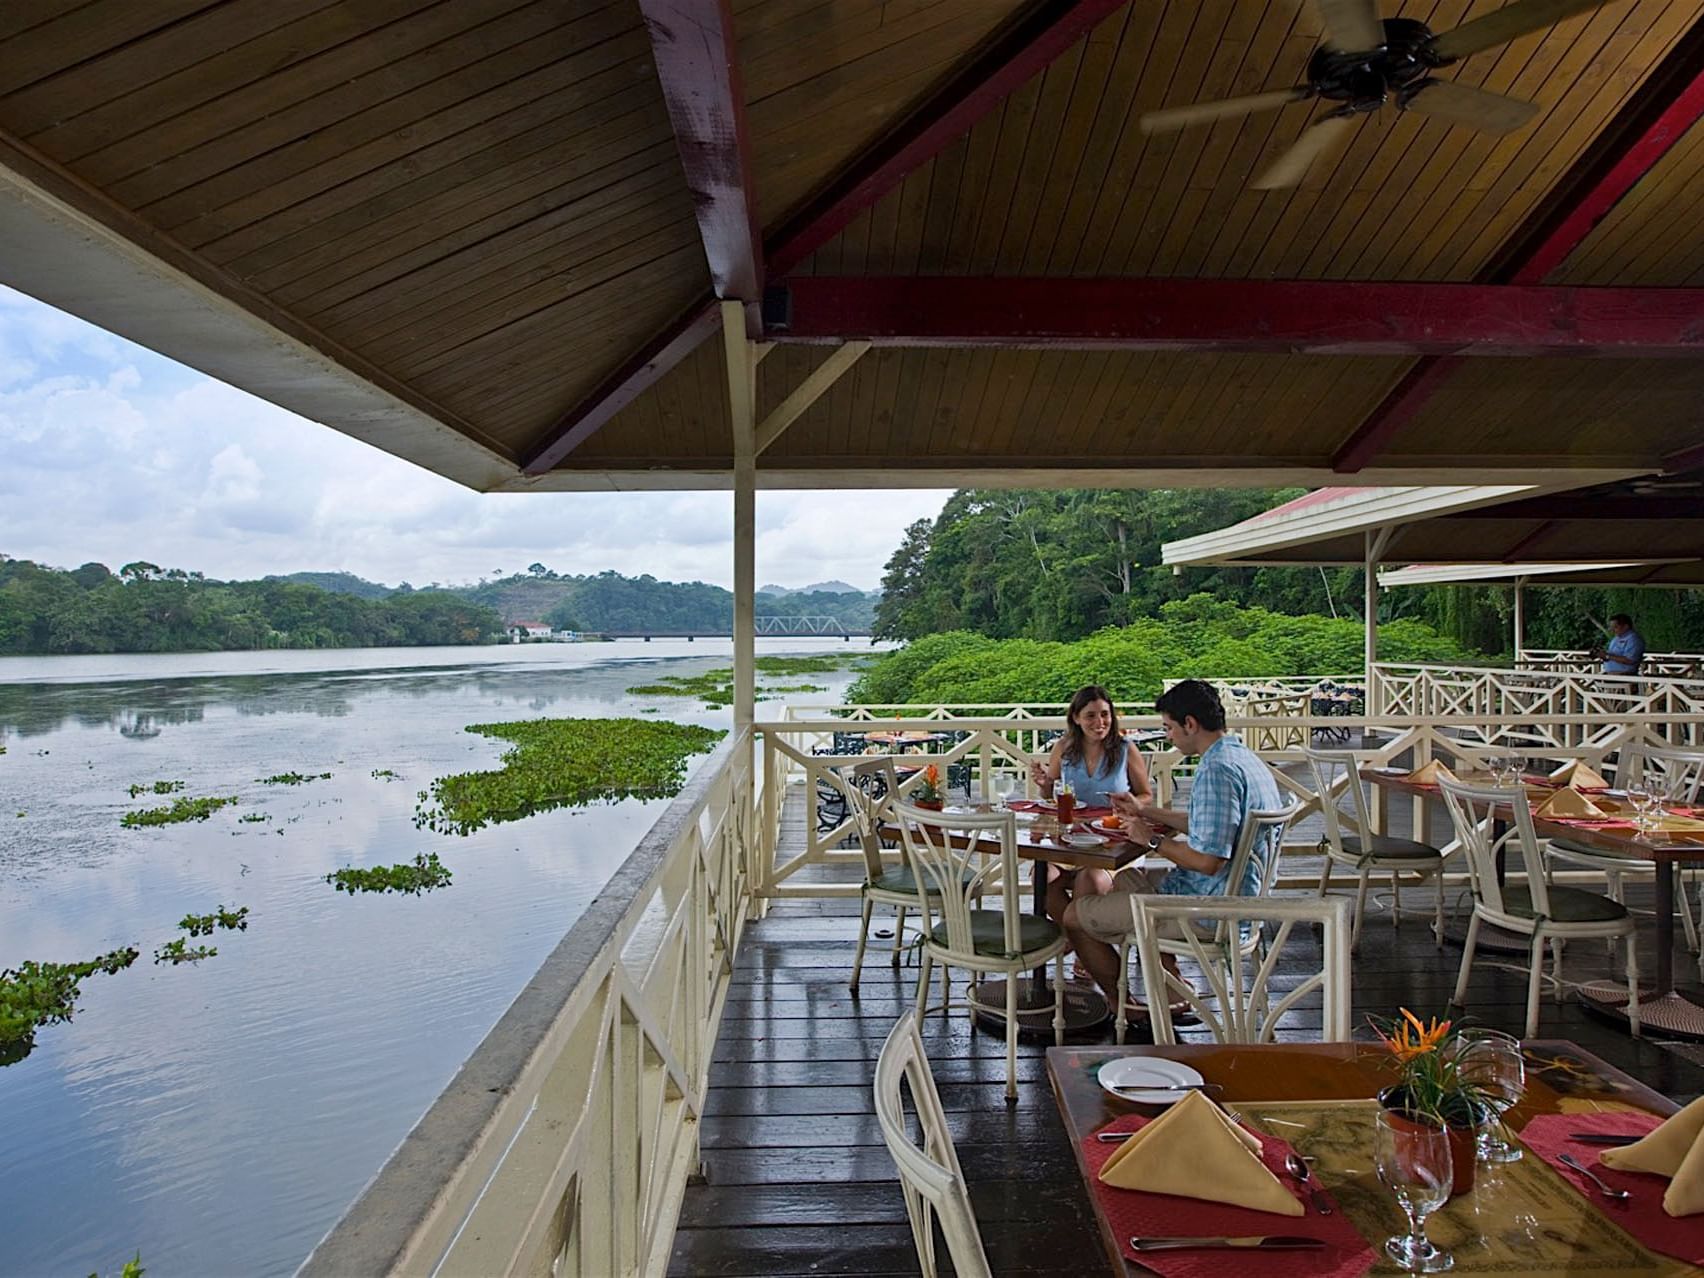 Lakefront dining area in Don Caiman at Gamboa Rainforest Resort